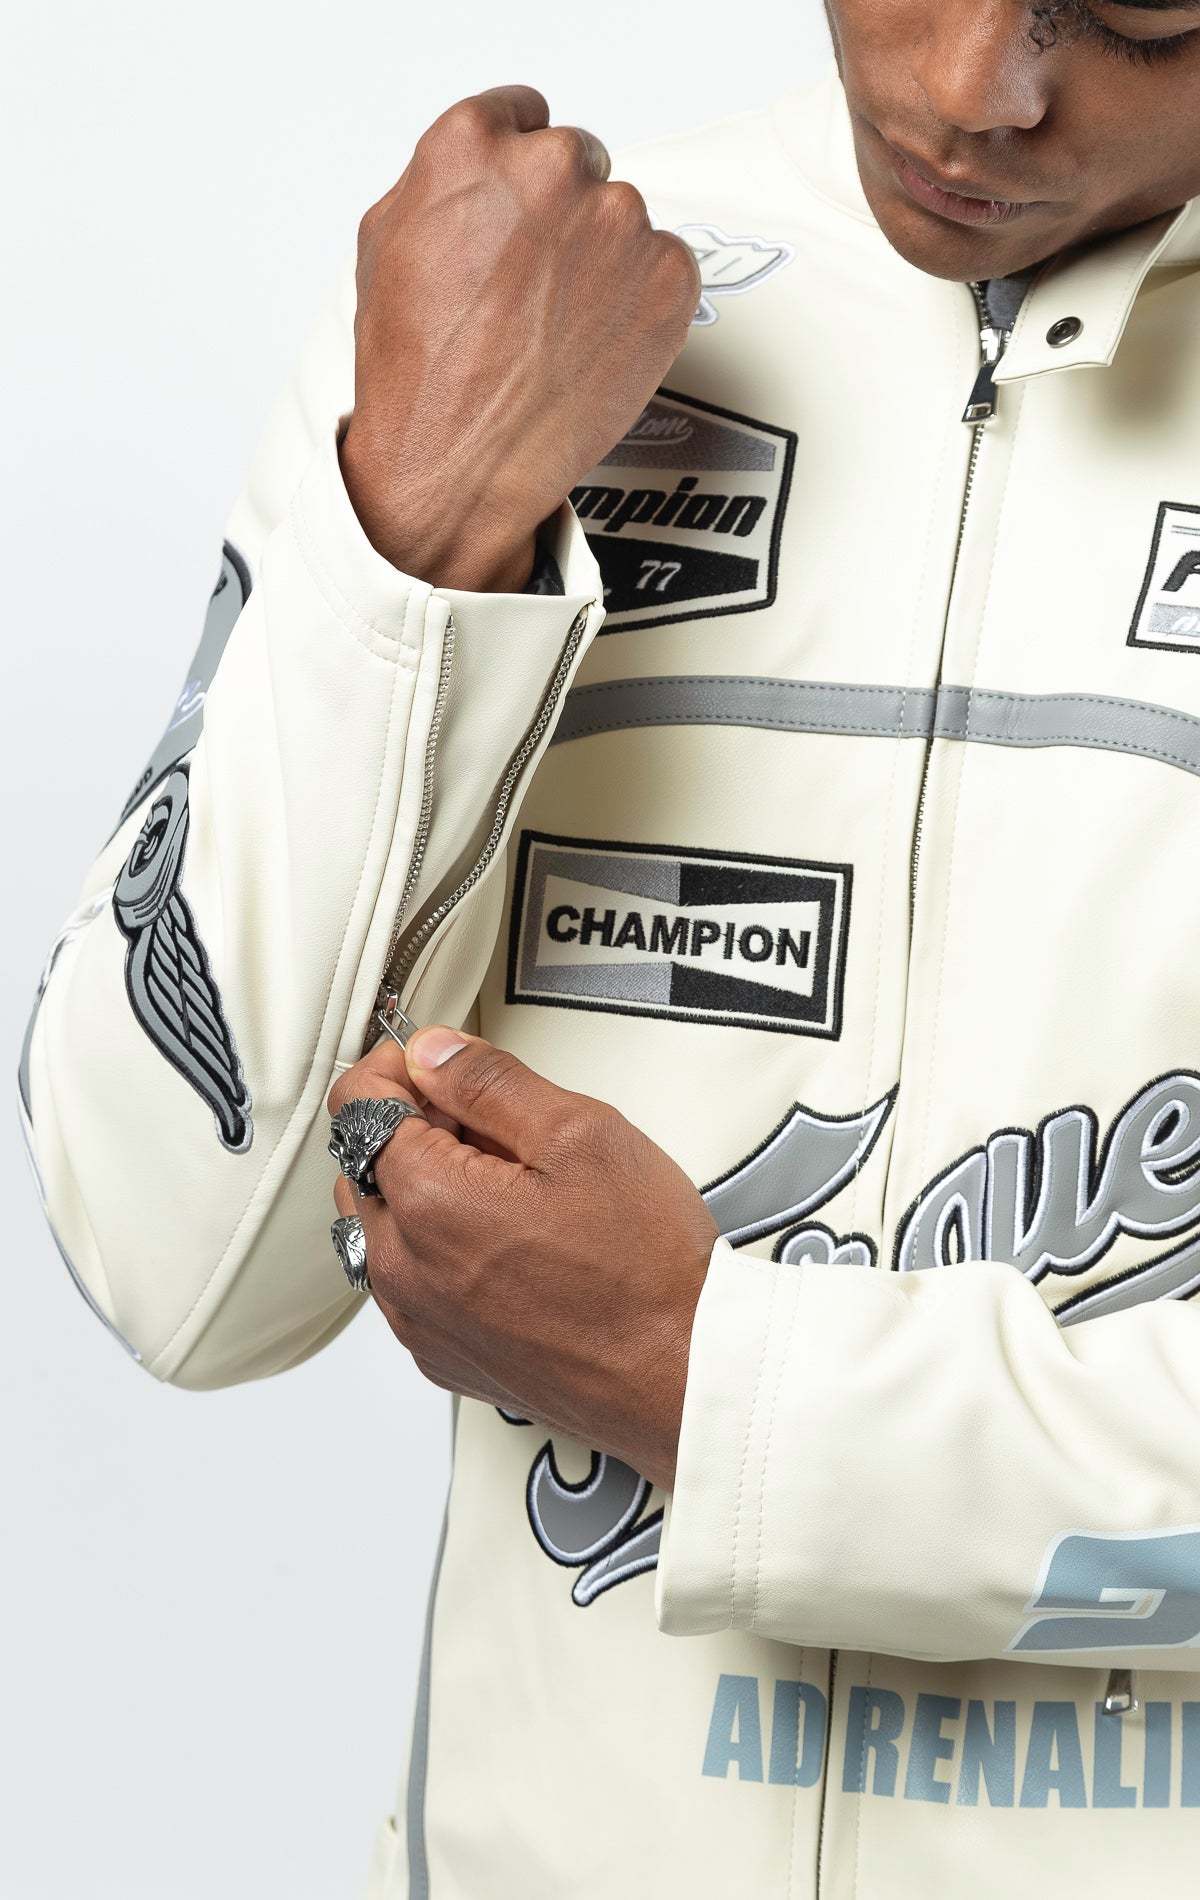 Cream Leather motorcycle jacket featuring a bold "Speedster" graphic on the back. This varsity style jacket includes ribbed cuffs and collar, and a sleek silver zipper closure